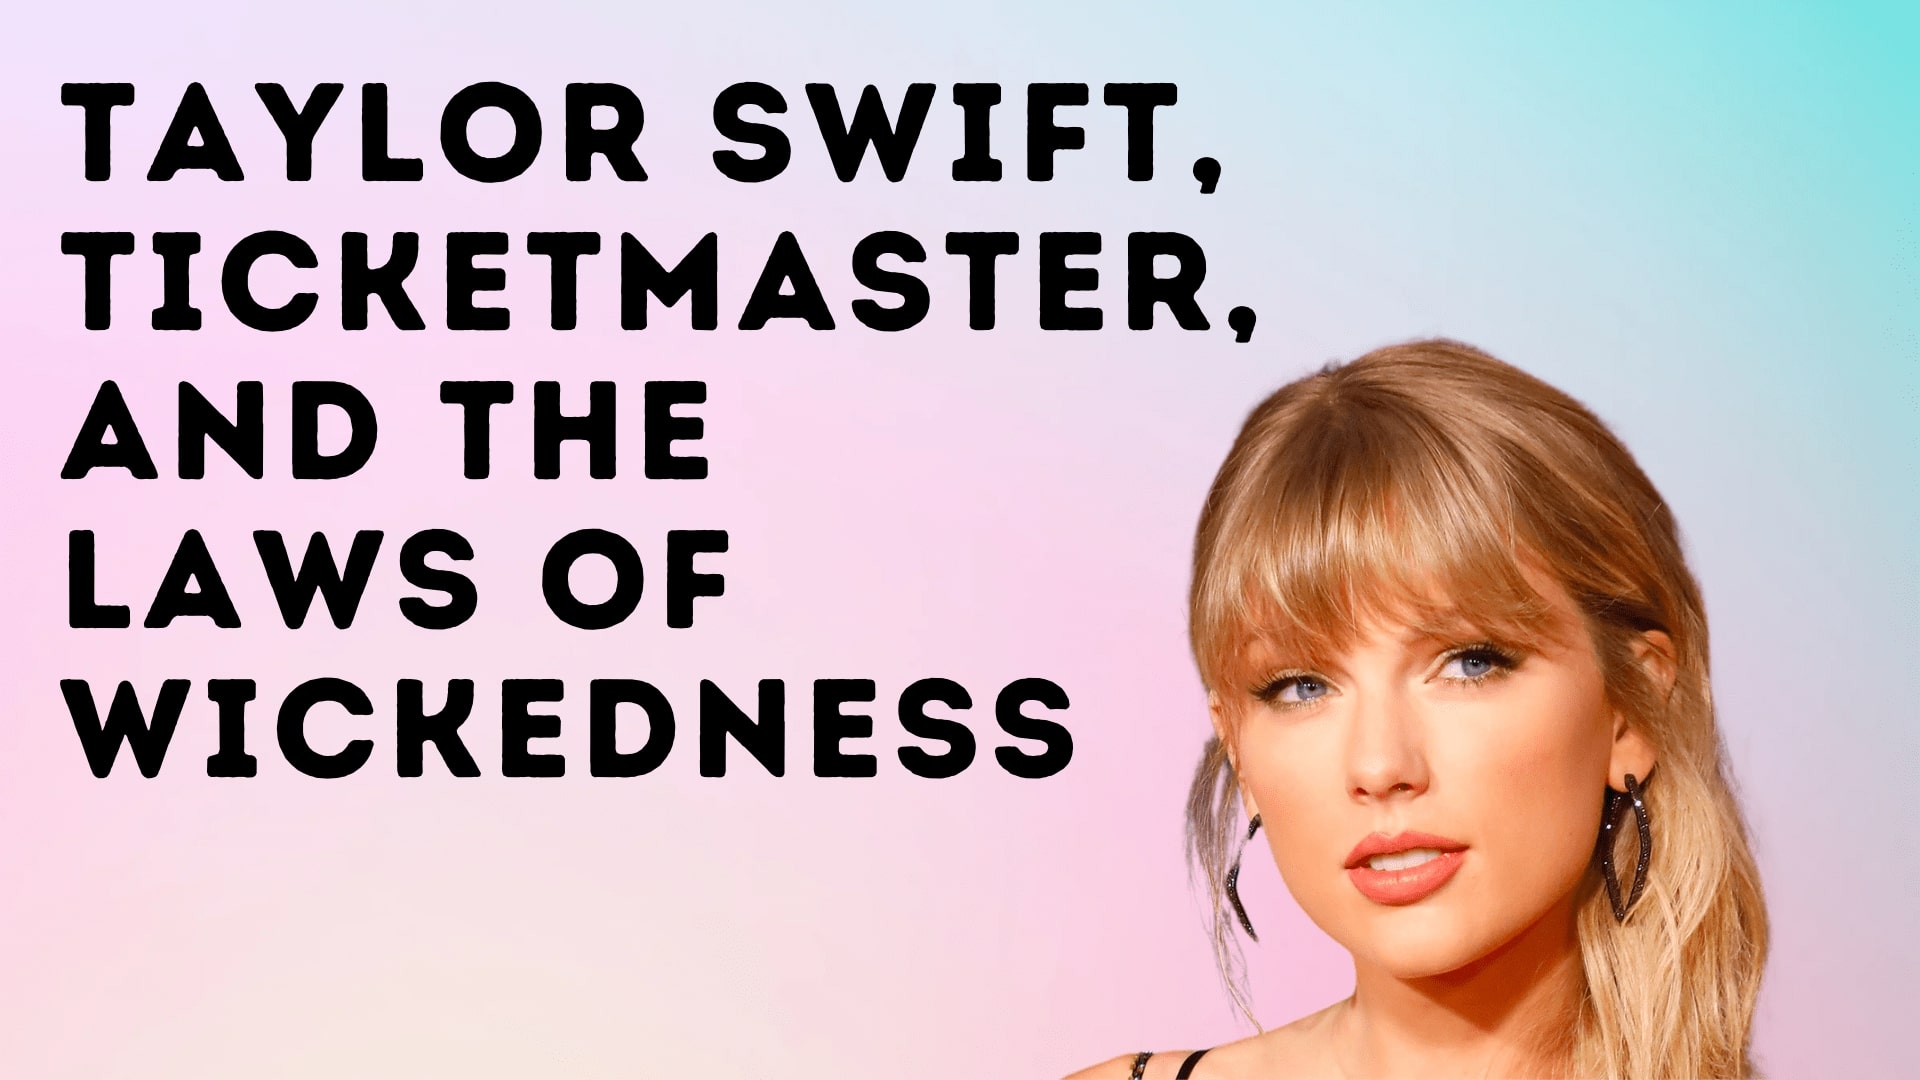 Taylor Swift, Ticketmaster, and the Laws of Wickedness